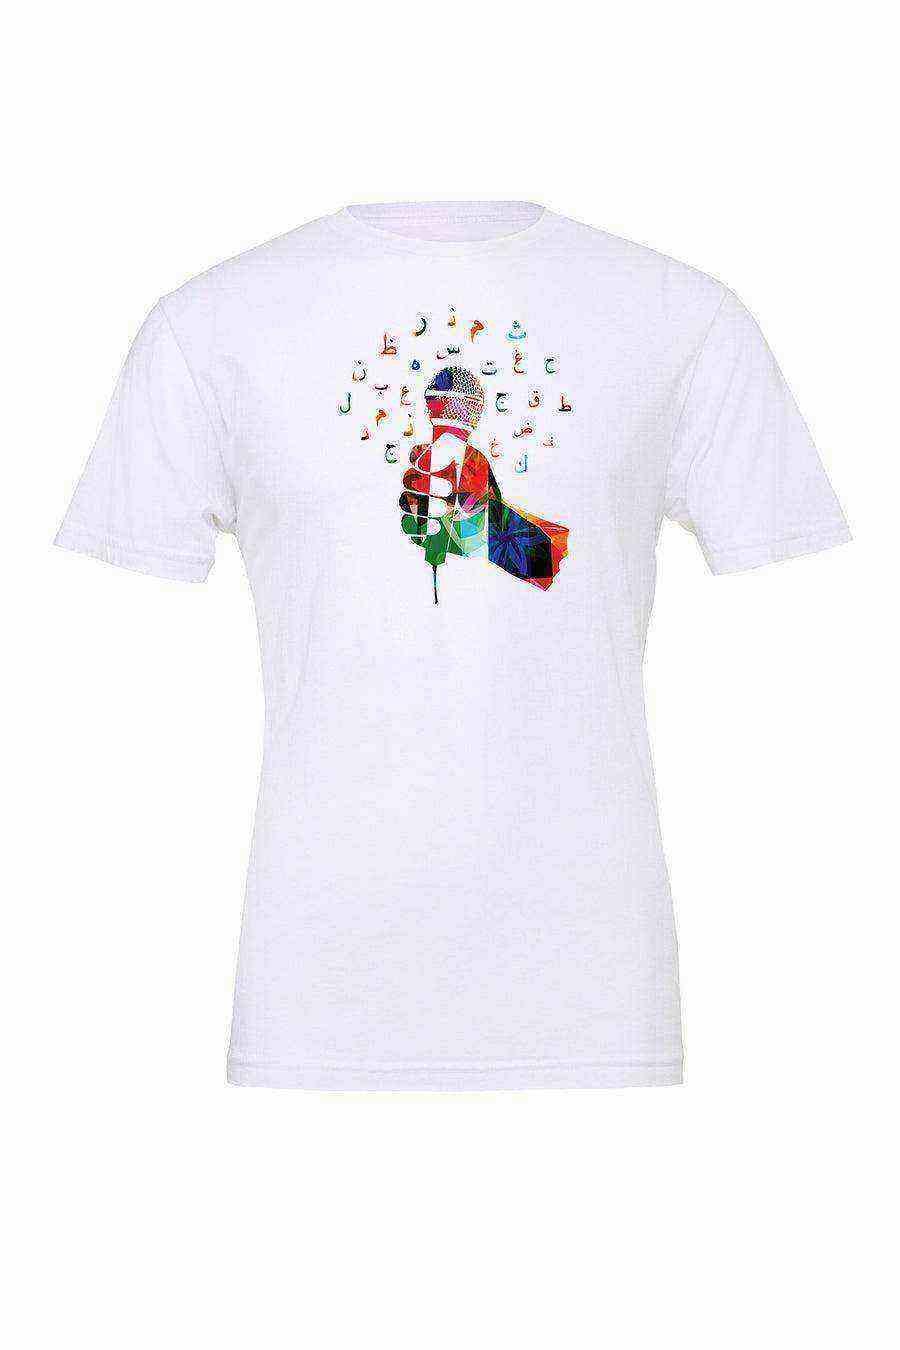 Womens | Music Notes And Microphones Shirt | Colorful Music Notes Tee - Dylan's Tees